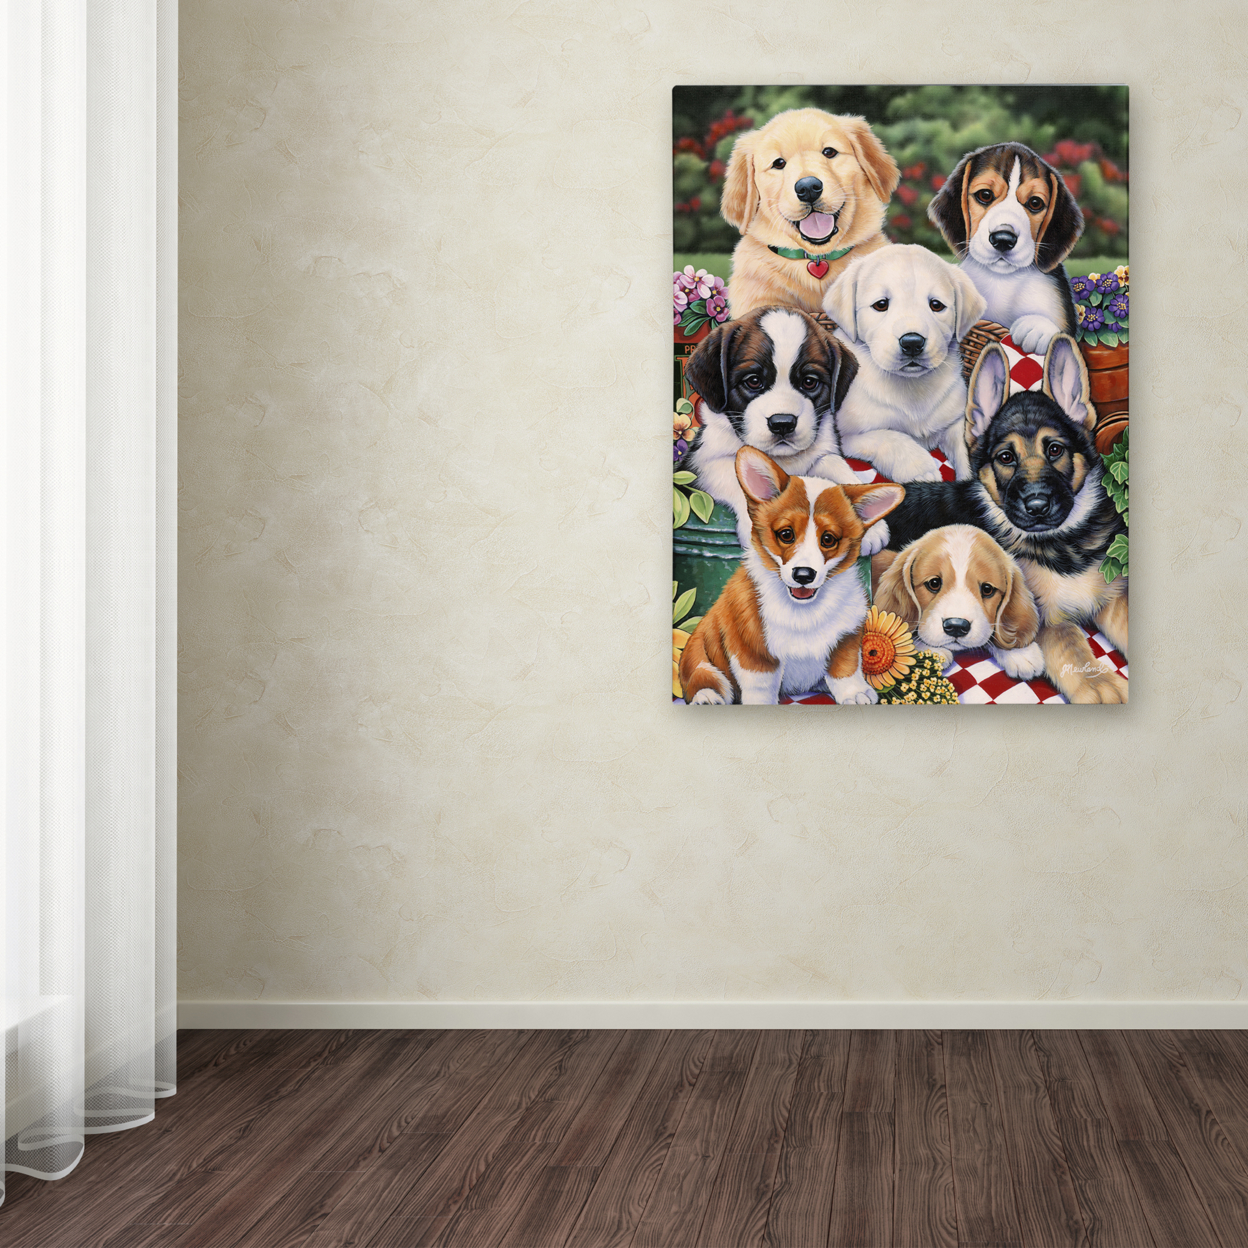 Jenny Newland 'Garden Puppies' Canvas Wall Art 35 X 47 Inches